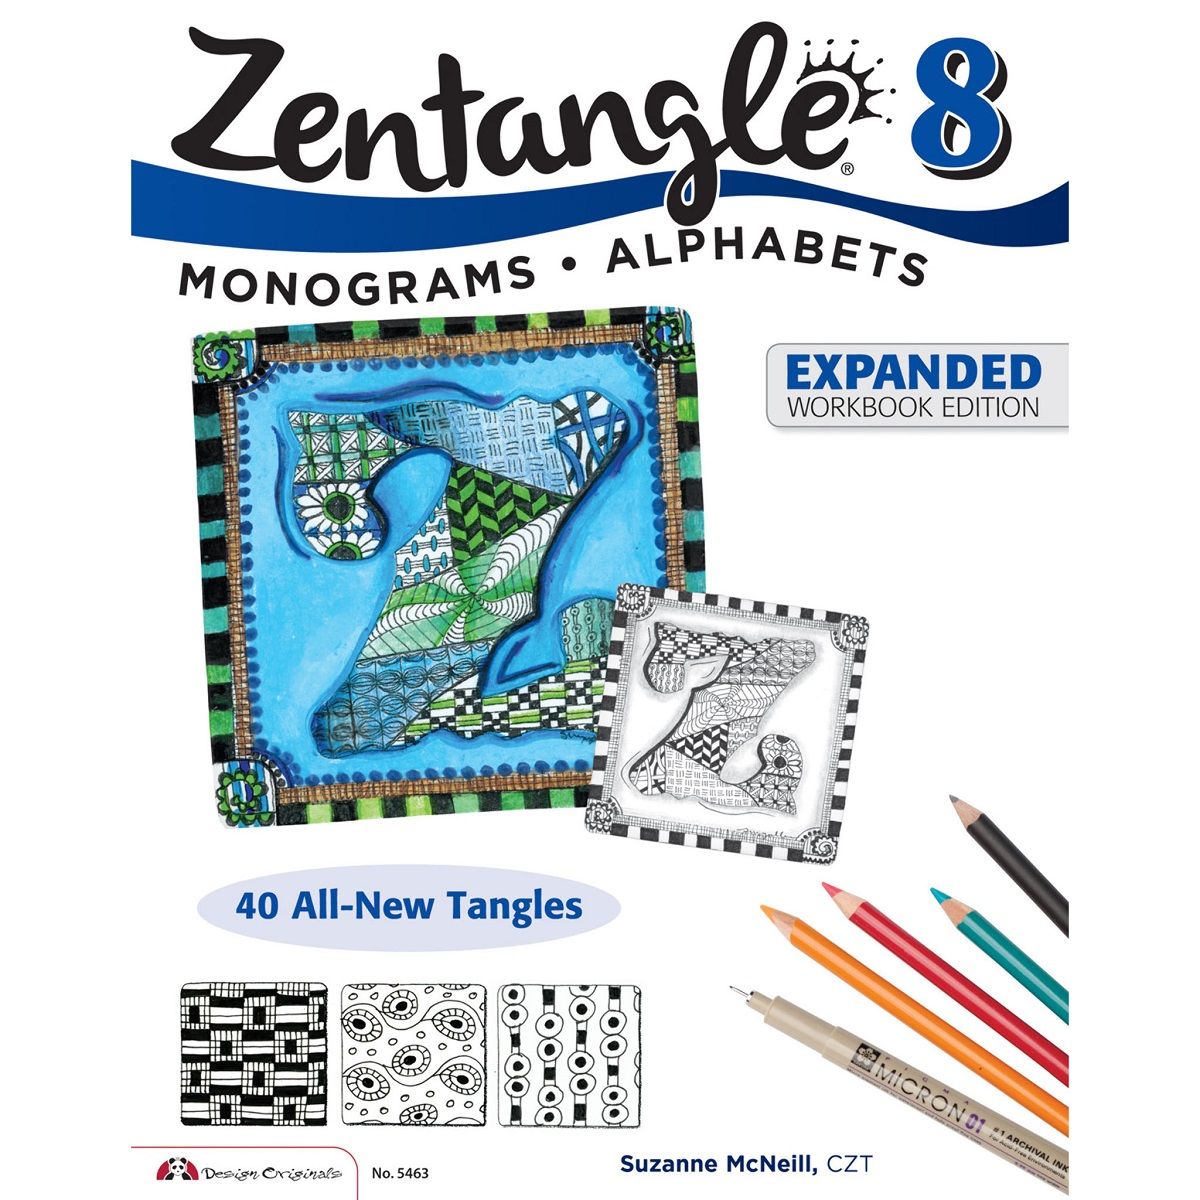 Zentangle 8 - Expanded Workbook Edition